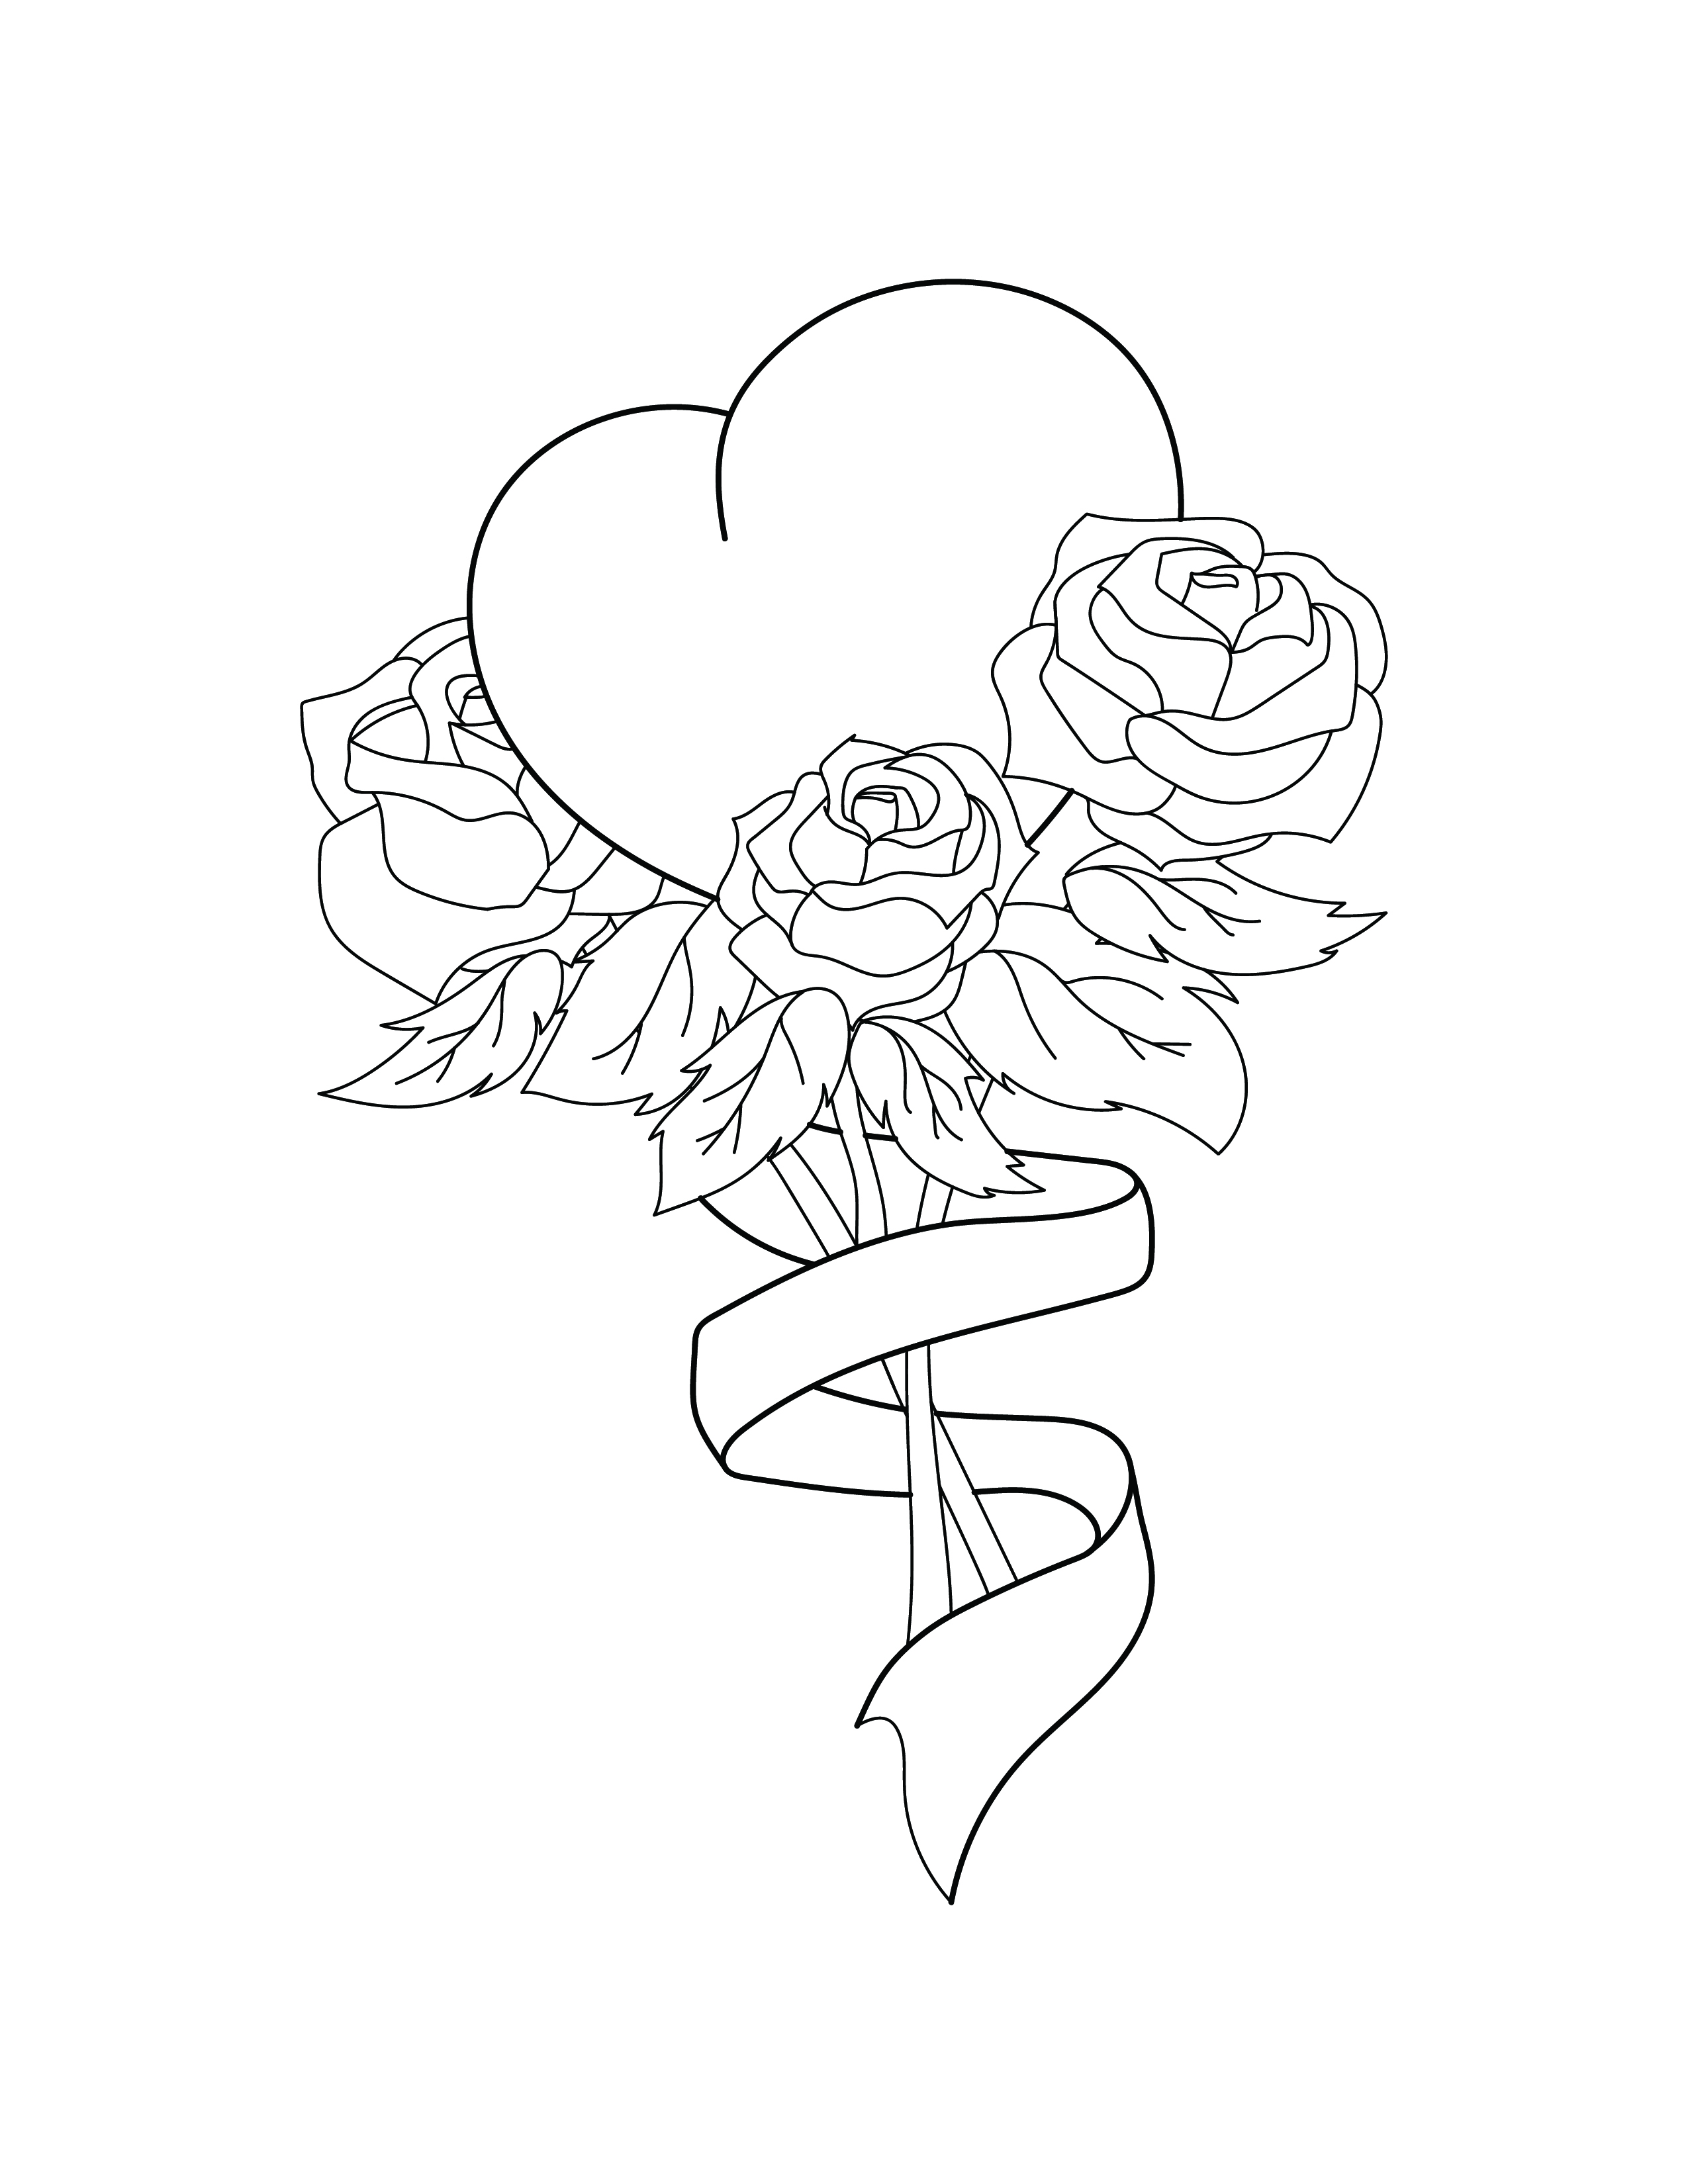 Rose Heart Coloring Page